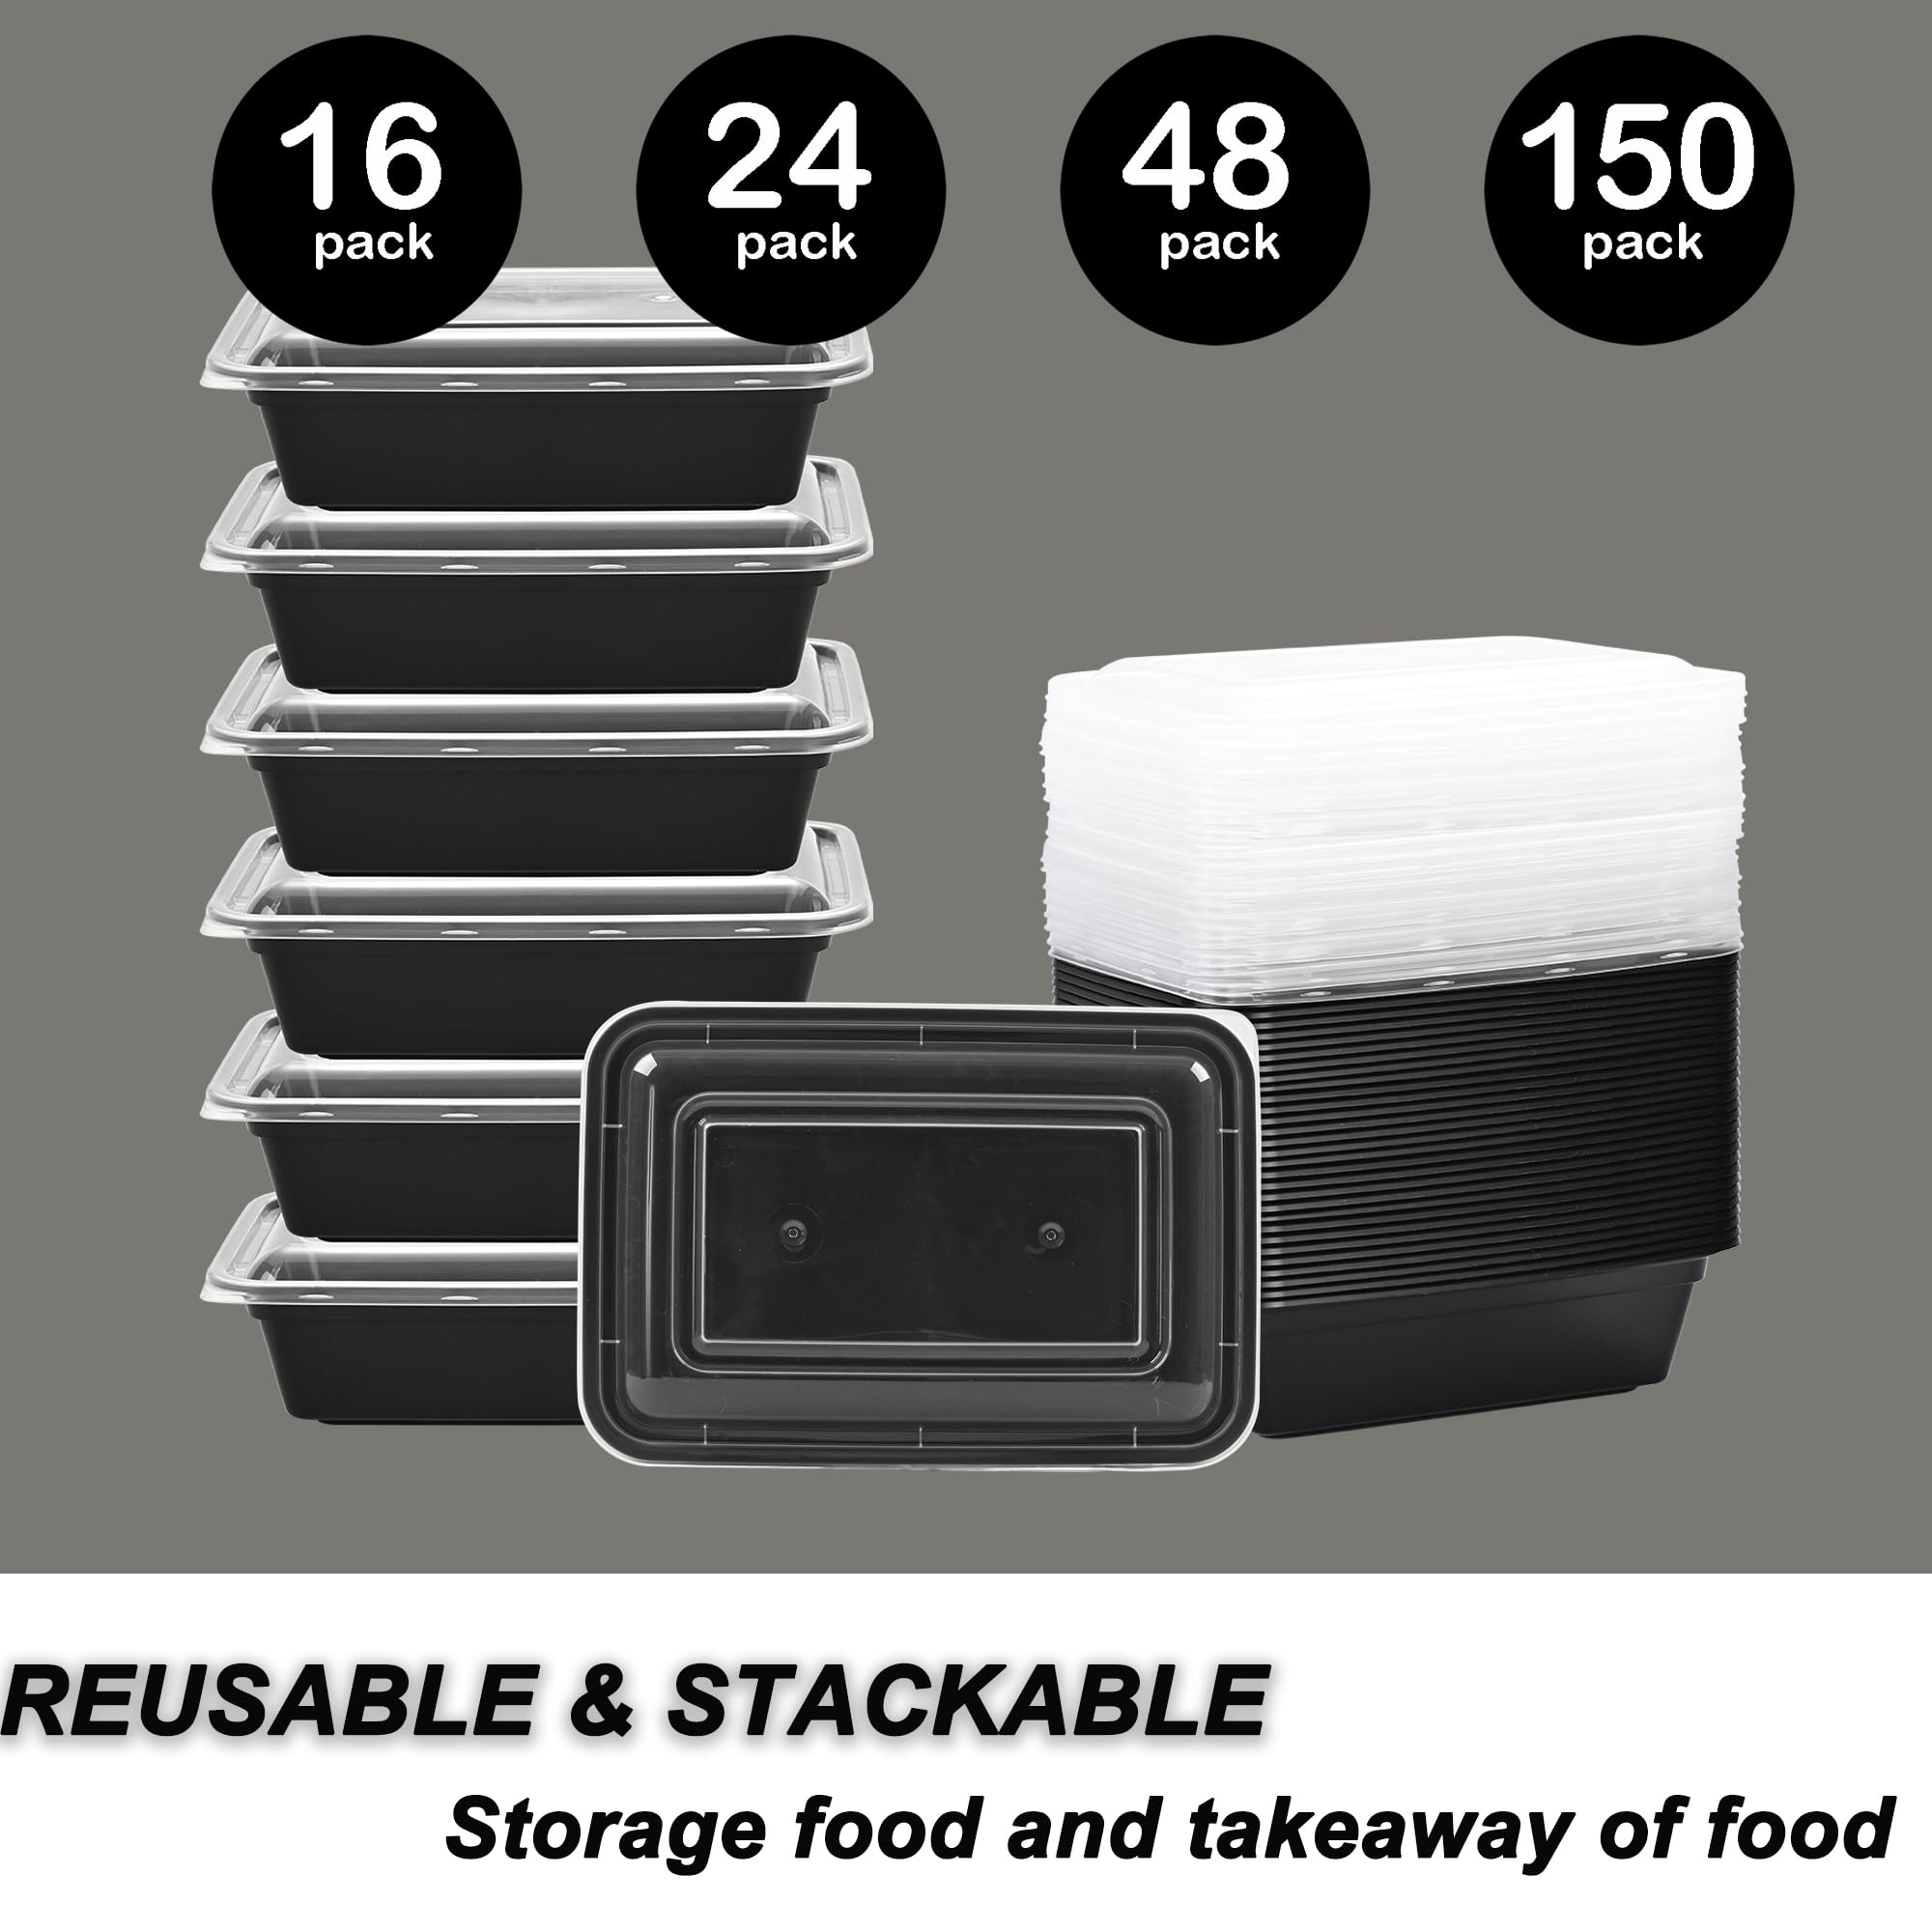 LOKATSE HOME 16 Pack Meal Prep Containers 24 oz Reusable Storage Lunch Bento Boxes, Freezer and Dishwasher Safe & Stackable